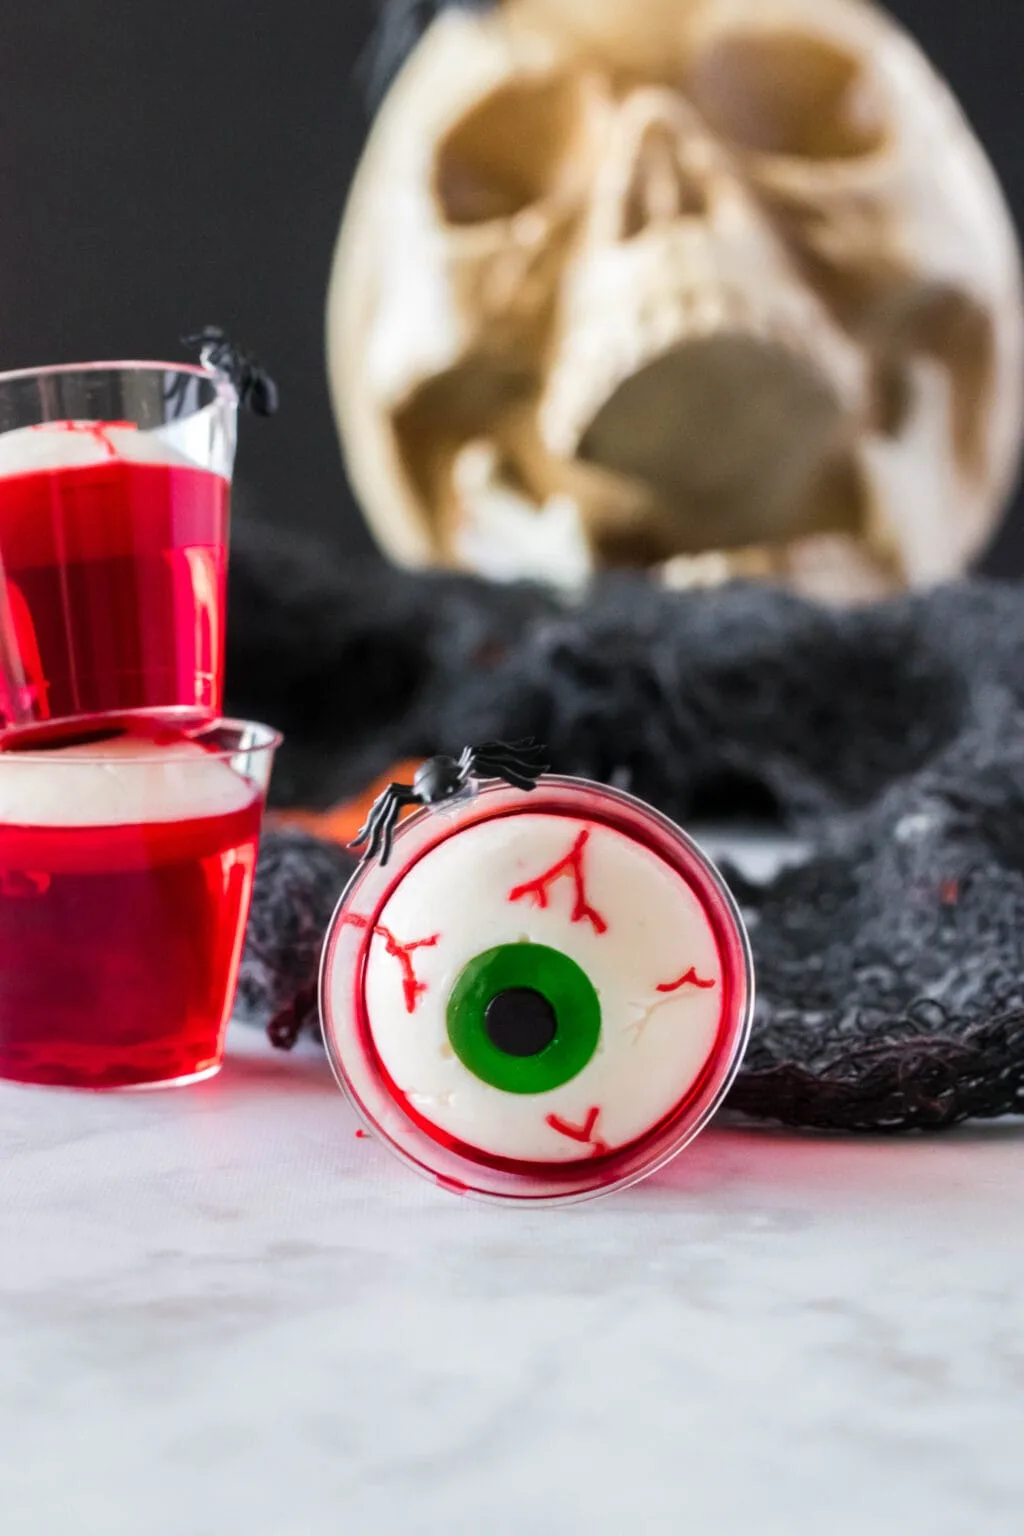 upclose photo of a red jello shot with gummy eyeball